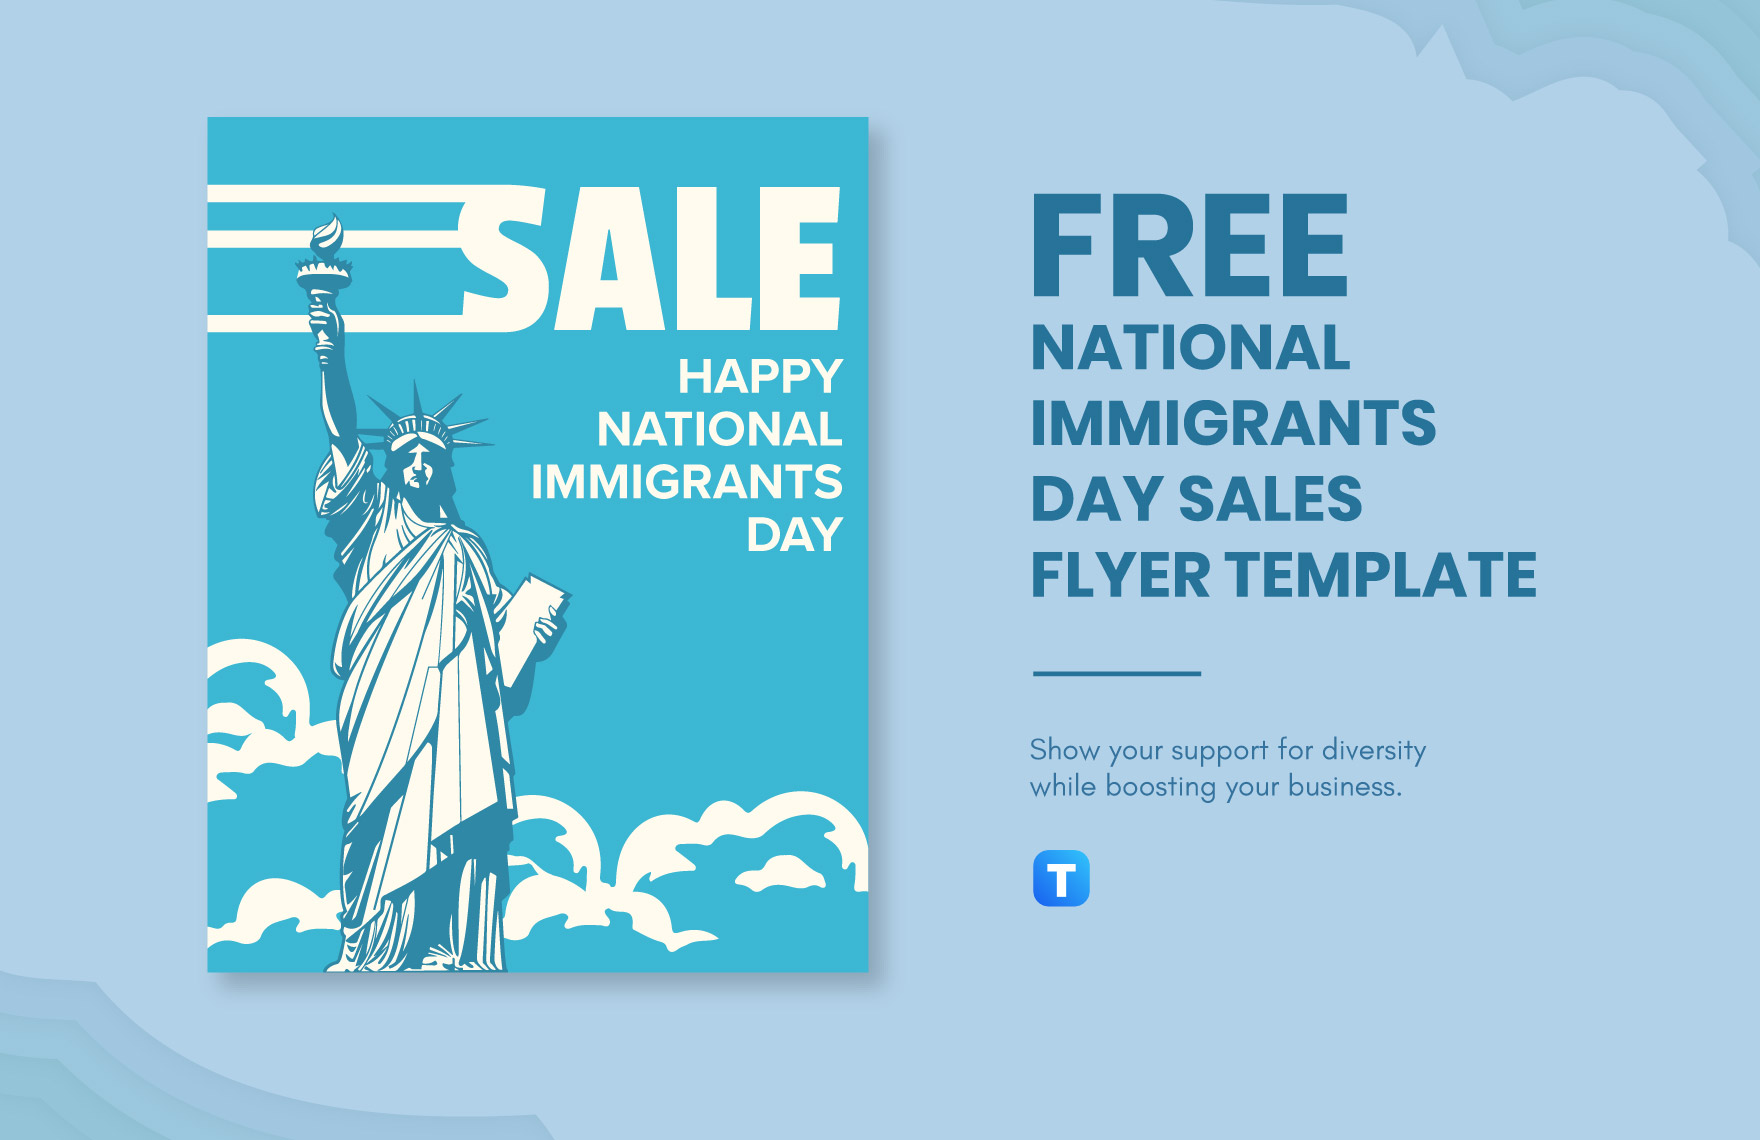 National Immigrants Day Sales Flyer Template